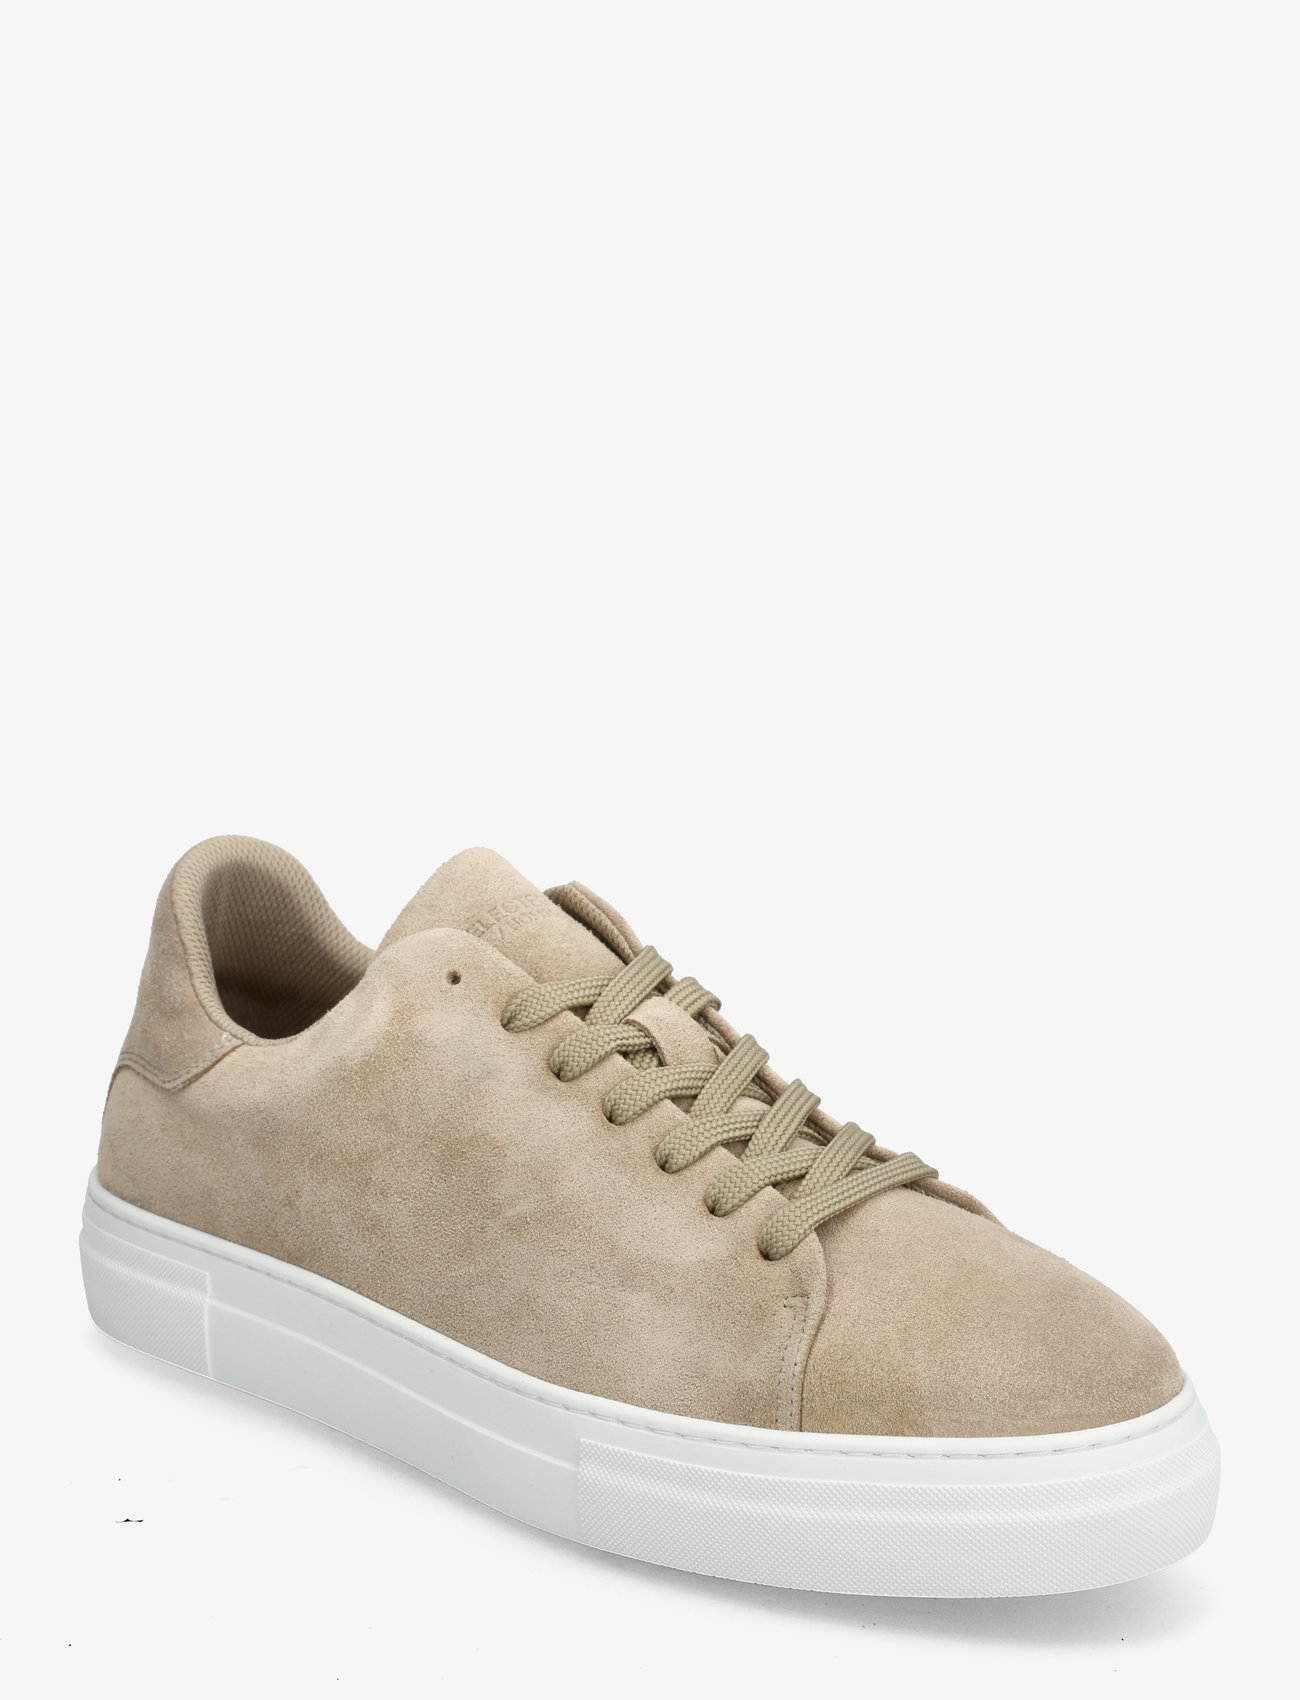 Selected Homme - SLHDAVID CHUNKY CLEAN SUEDE TRAINER B - niedriger schnitt - sand - 0